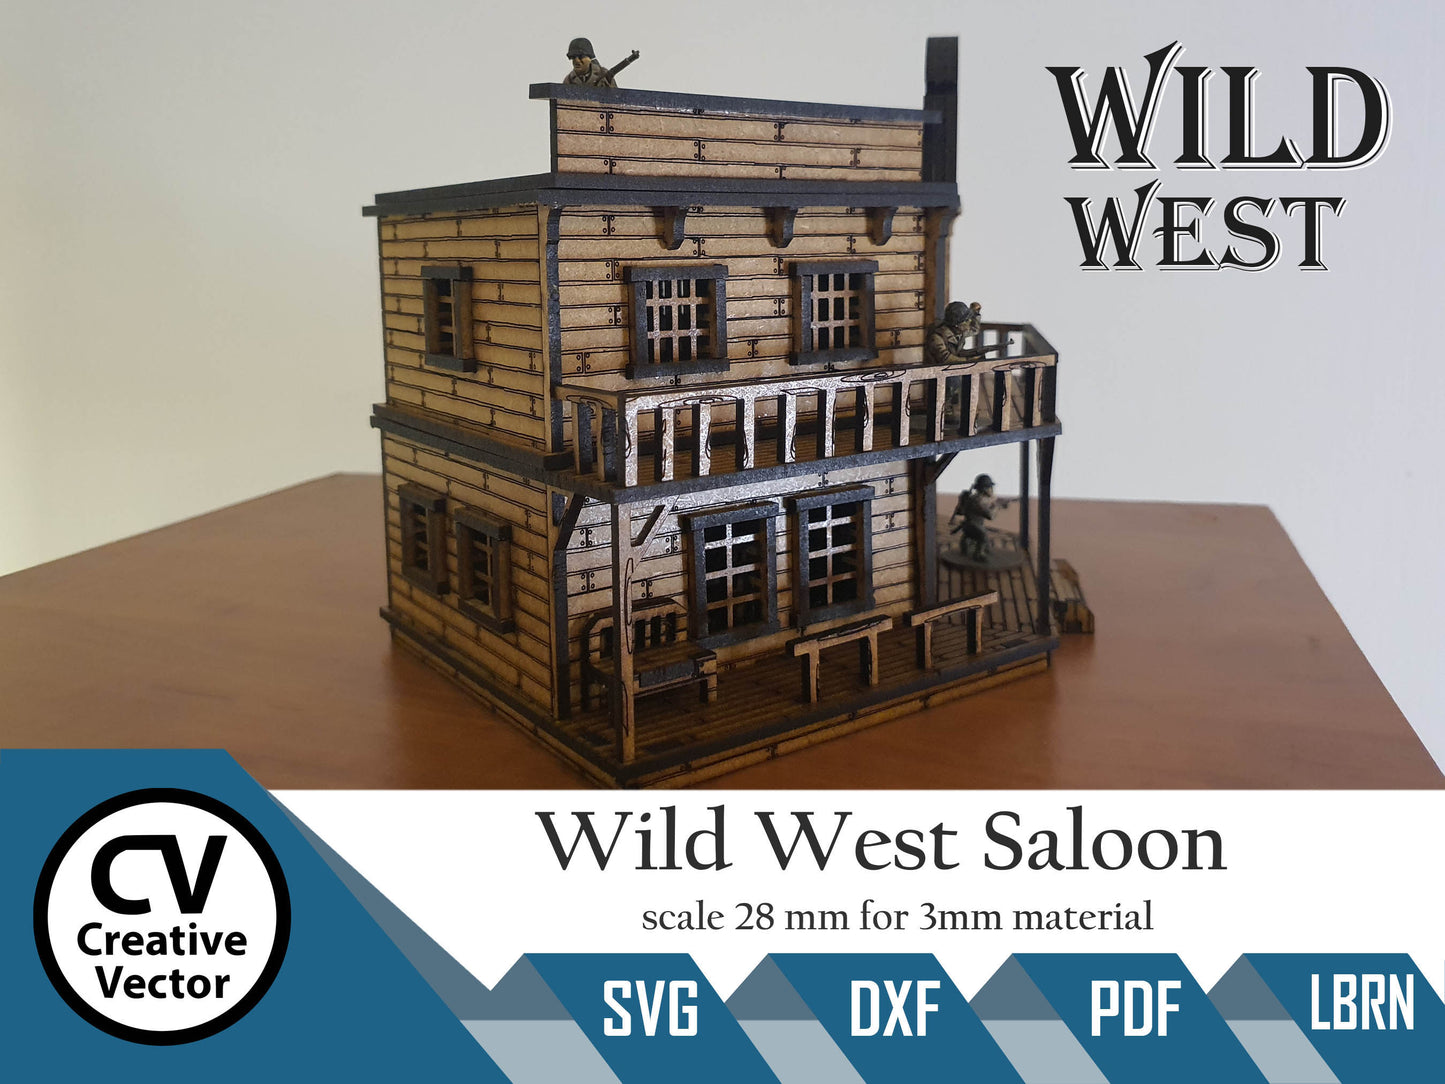 Wild West Saloon in scale 28mm for Wargamers